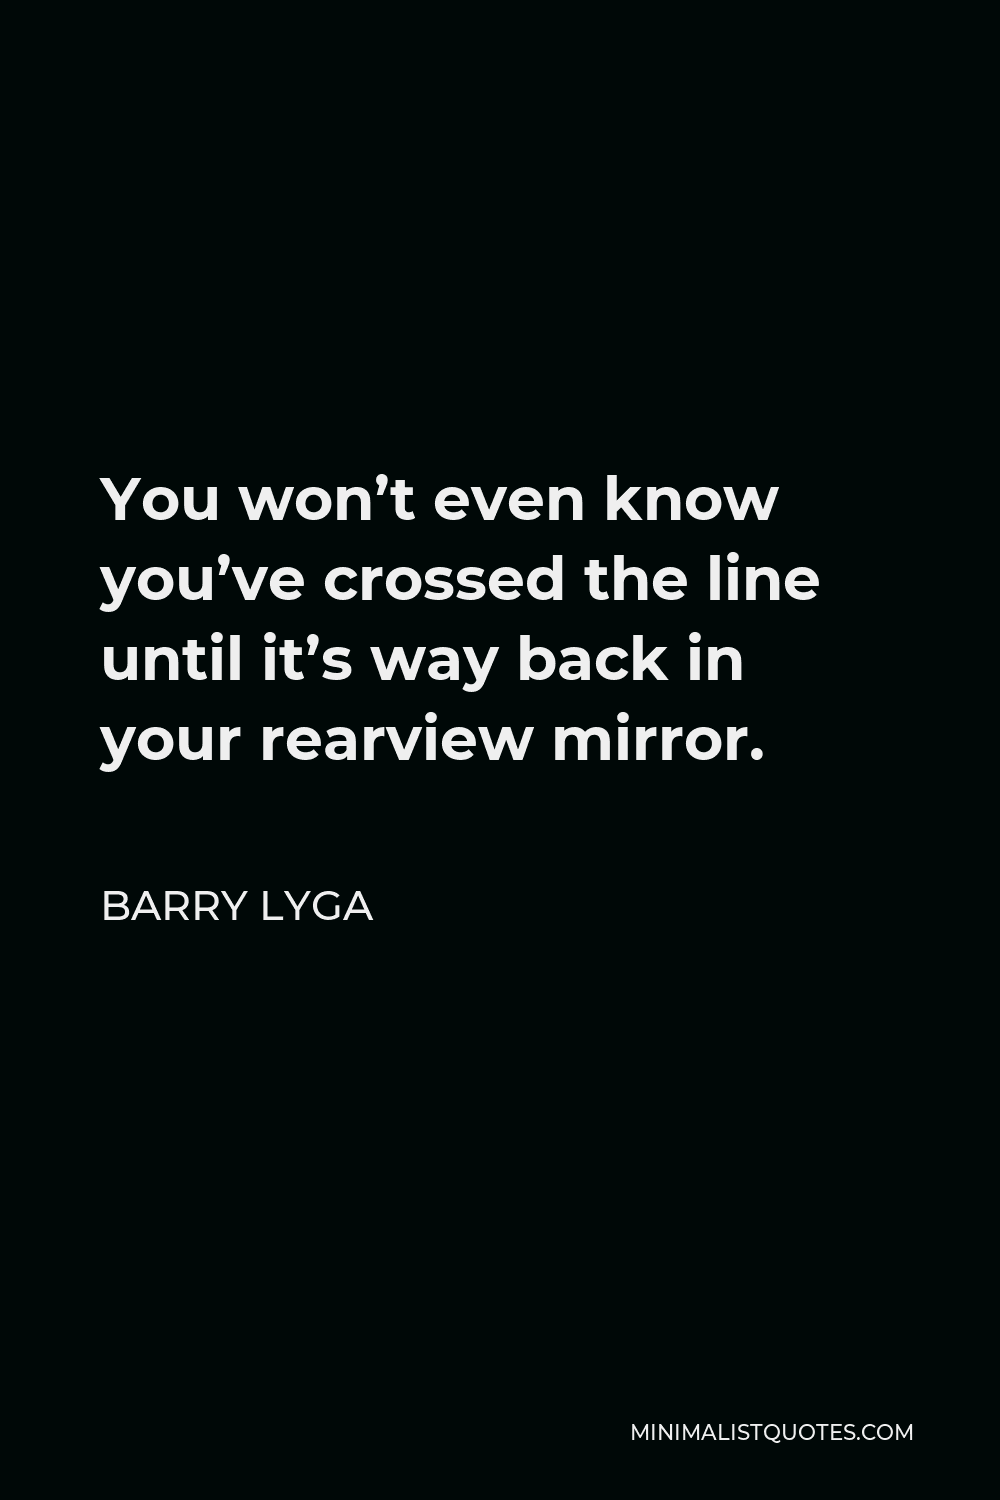 Barry Lyga Quote - You won’t even know you’ve crossed the line until it’s way back in your rearview mirror.